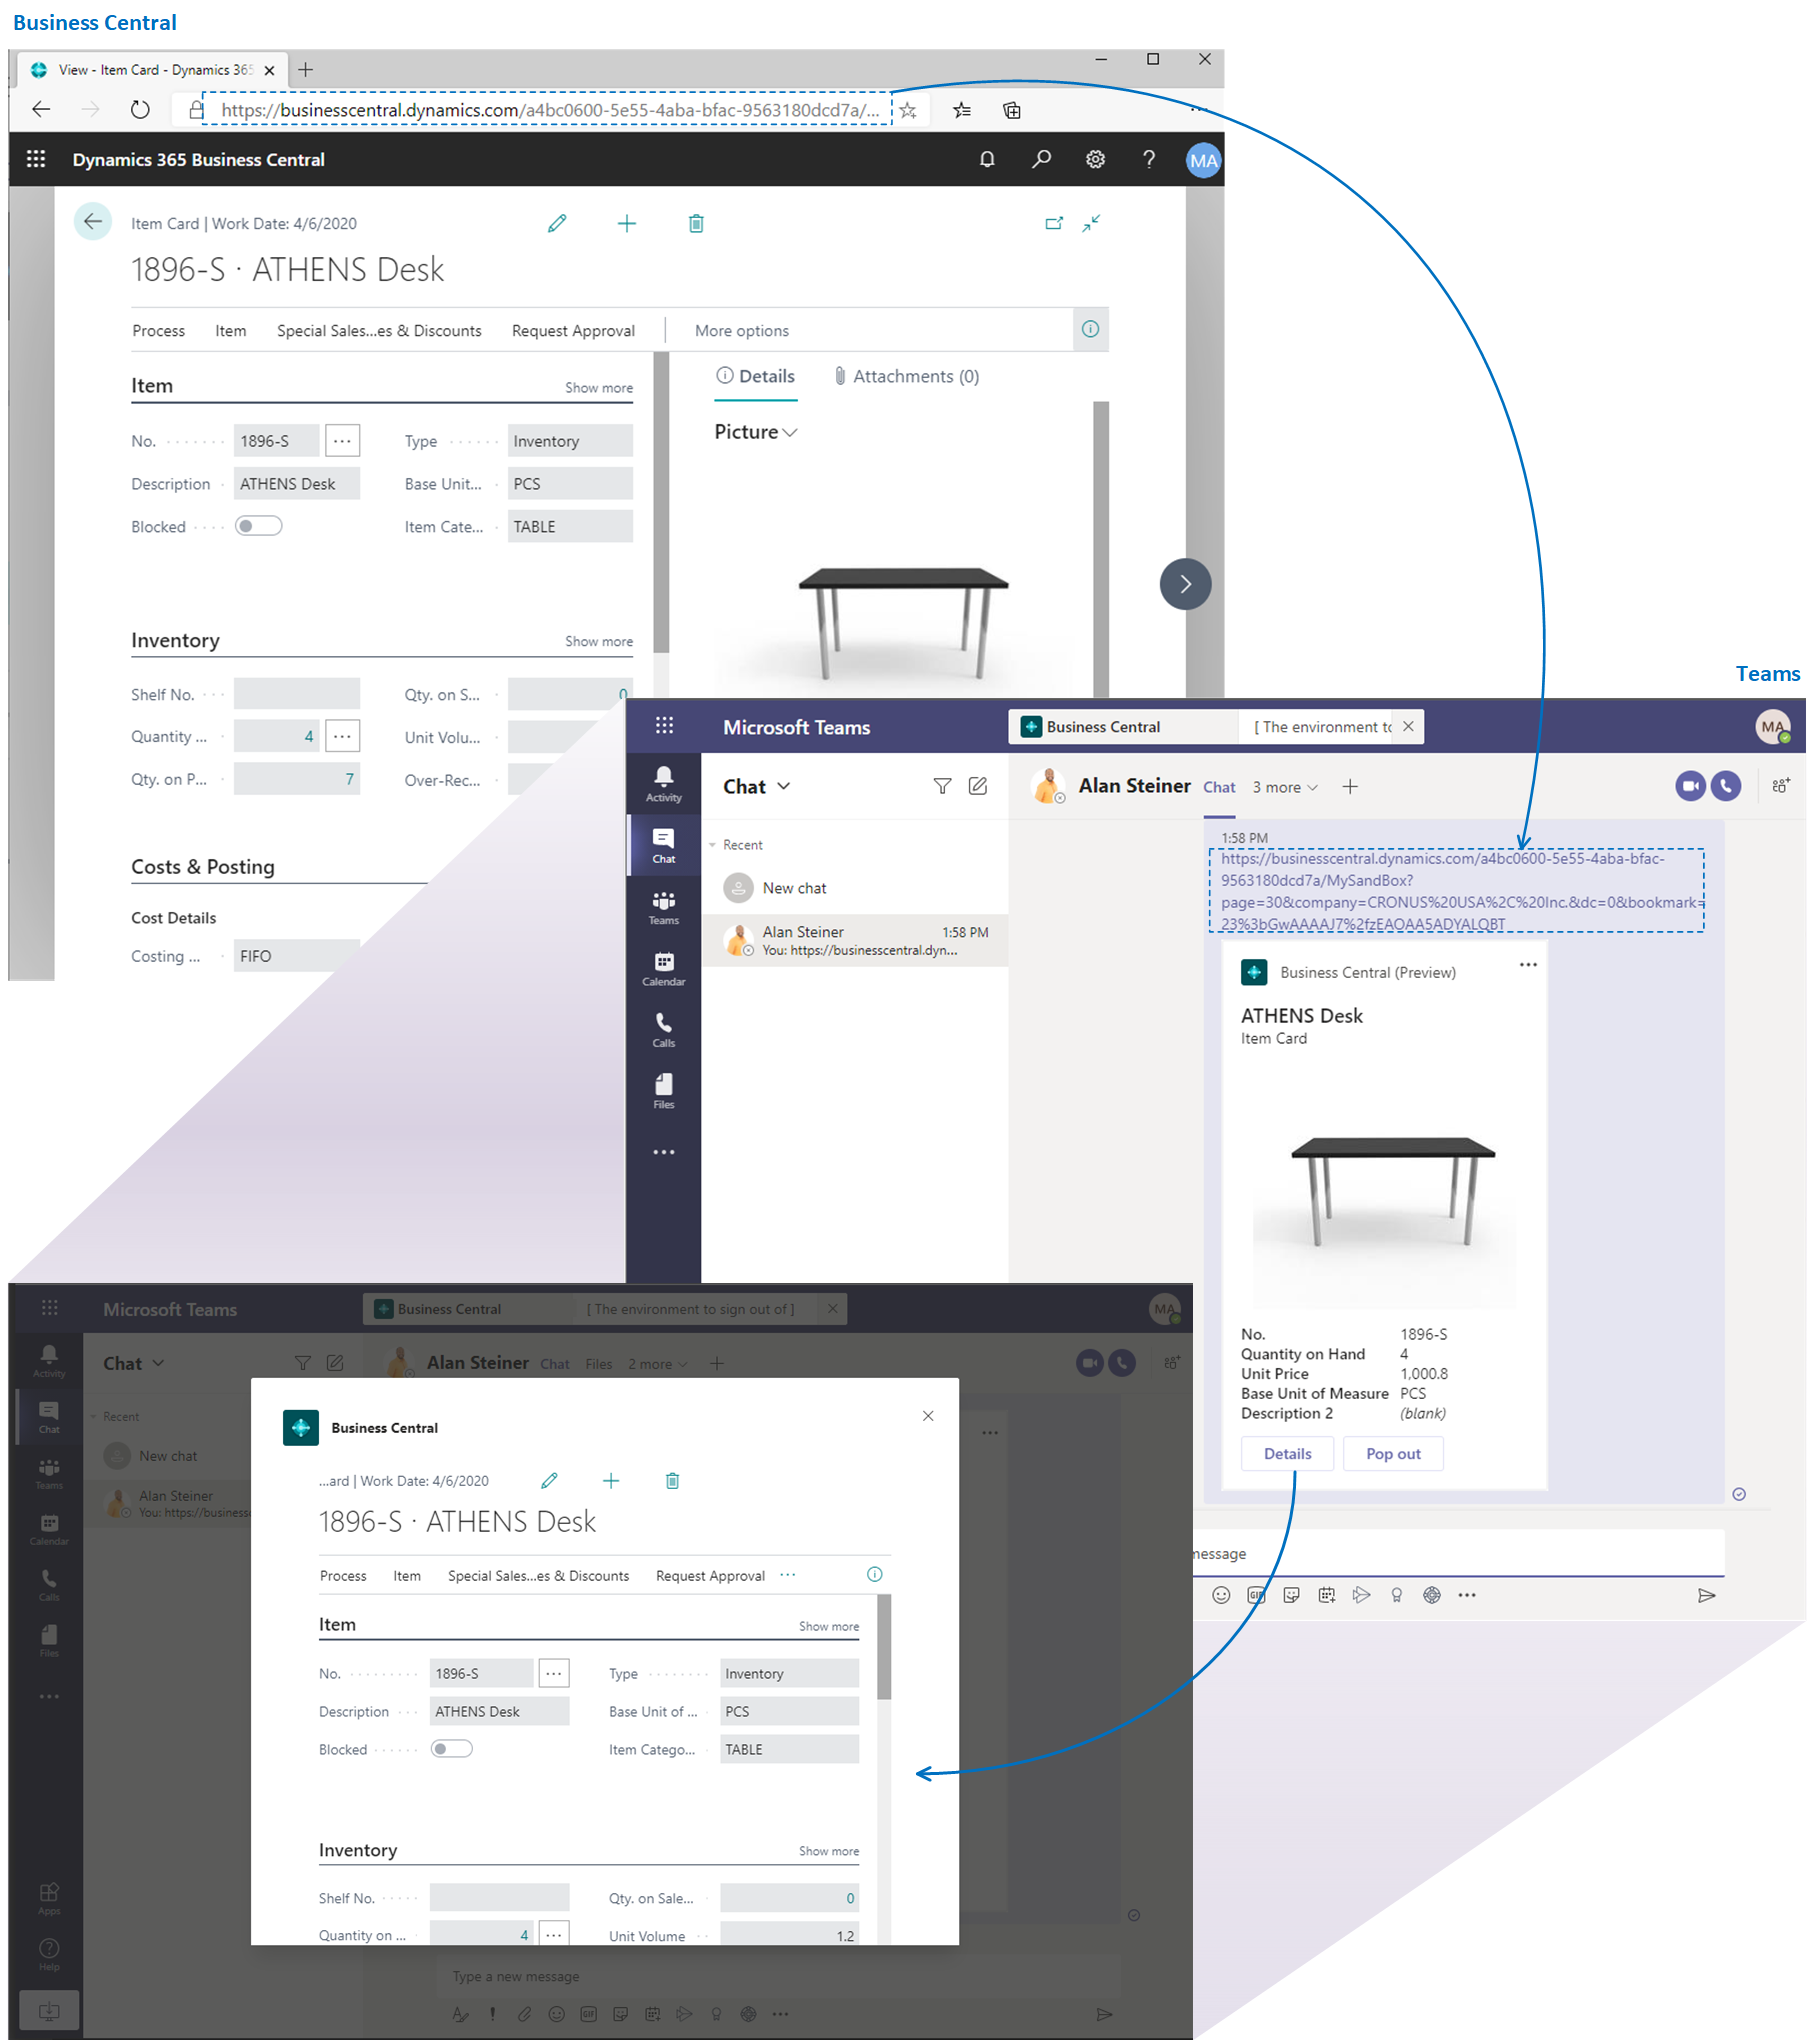 Microsoft Teams Integration with Business Central